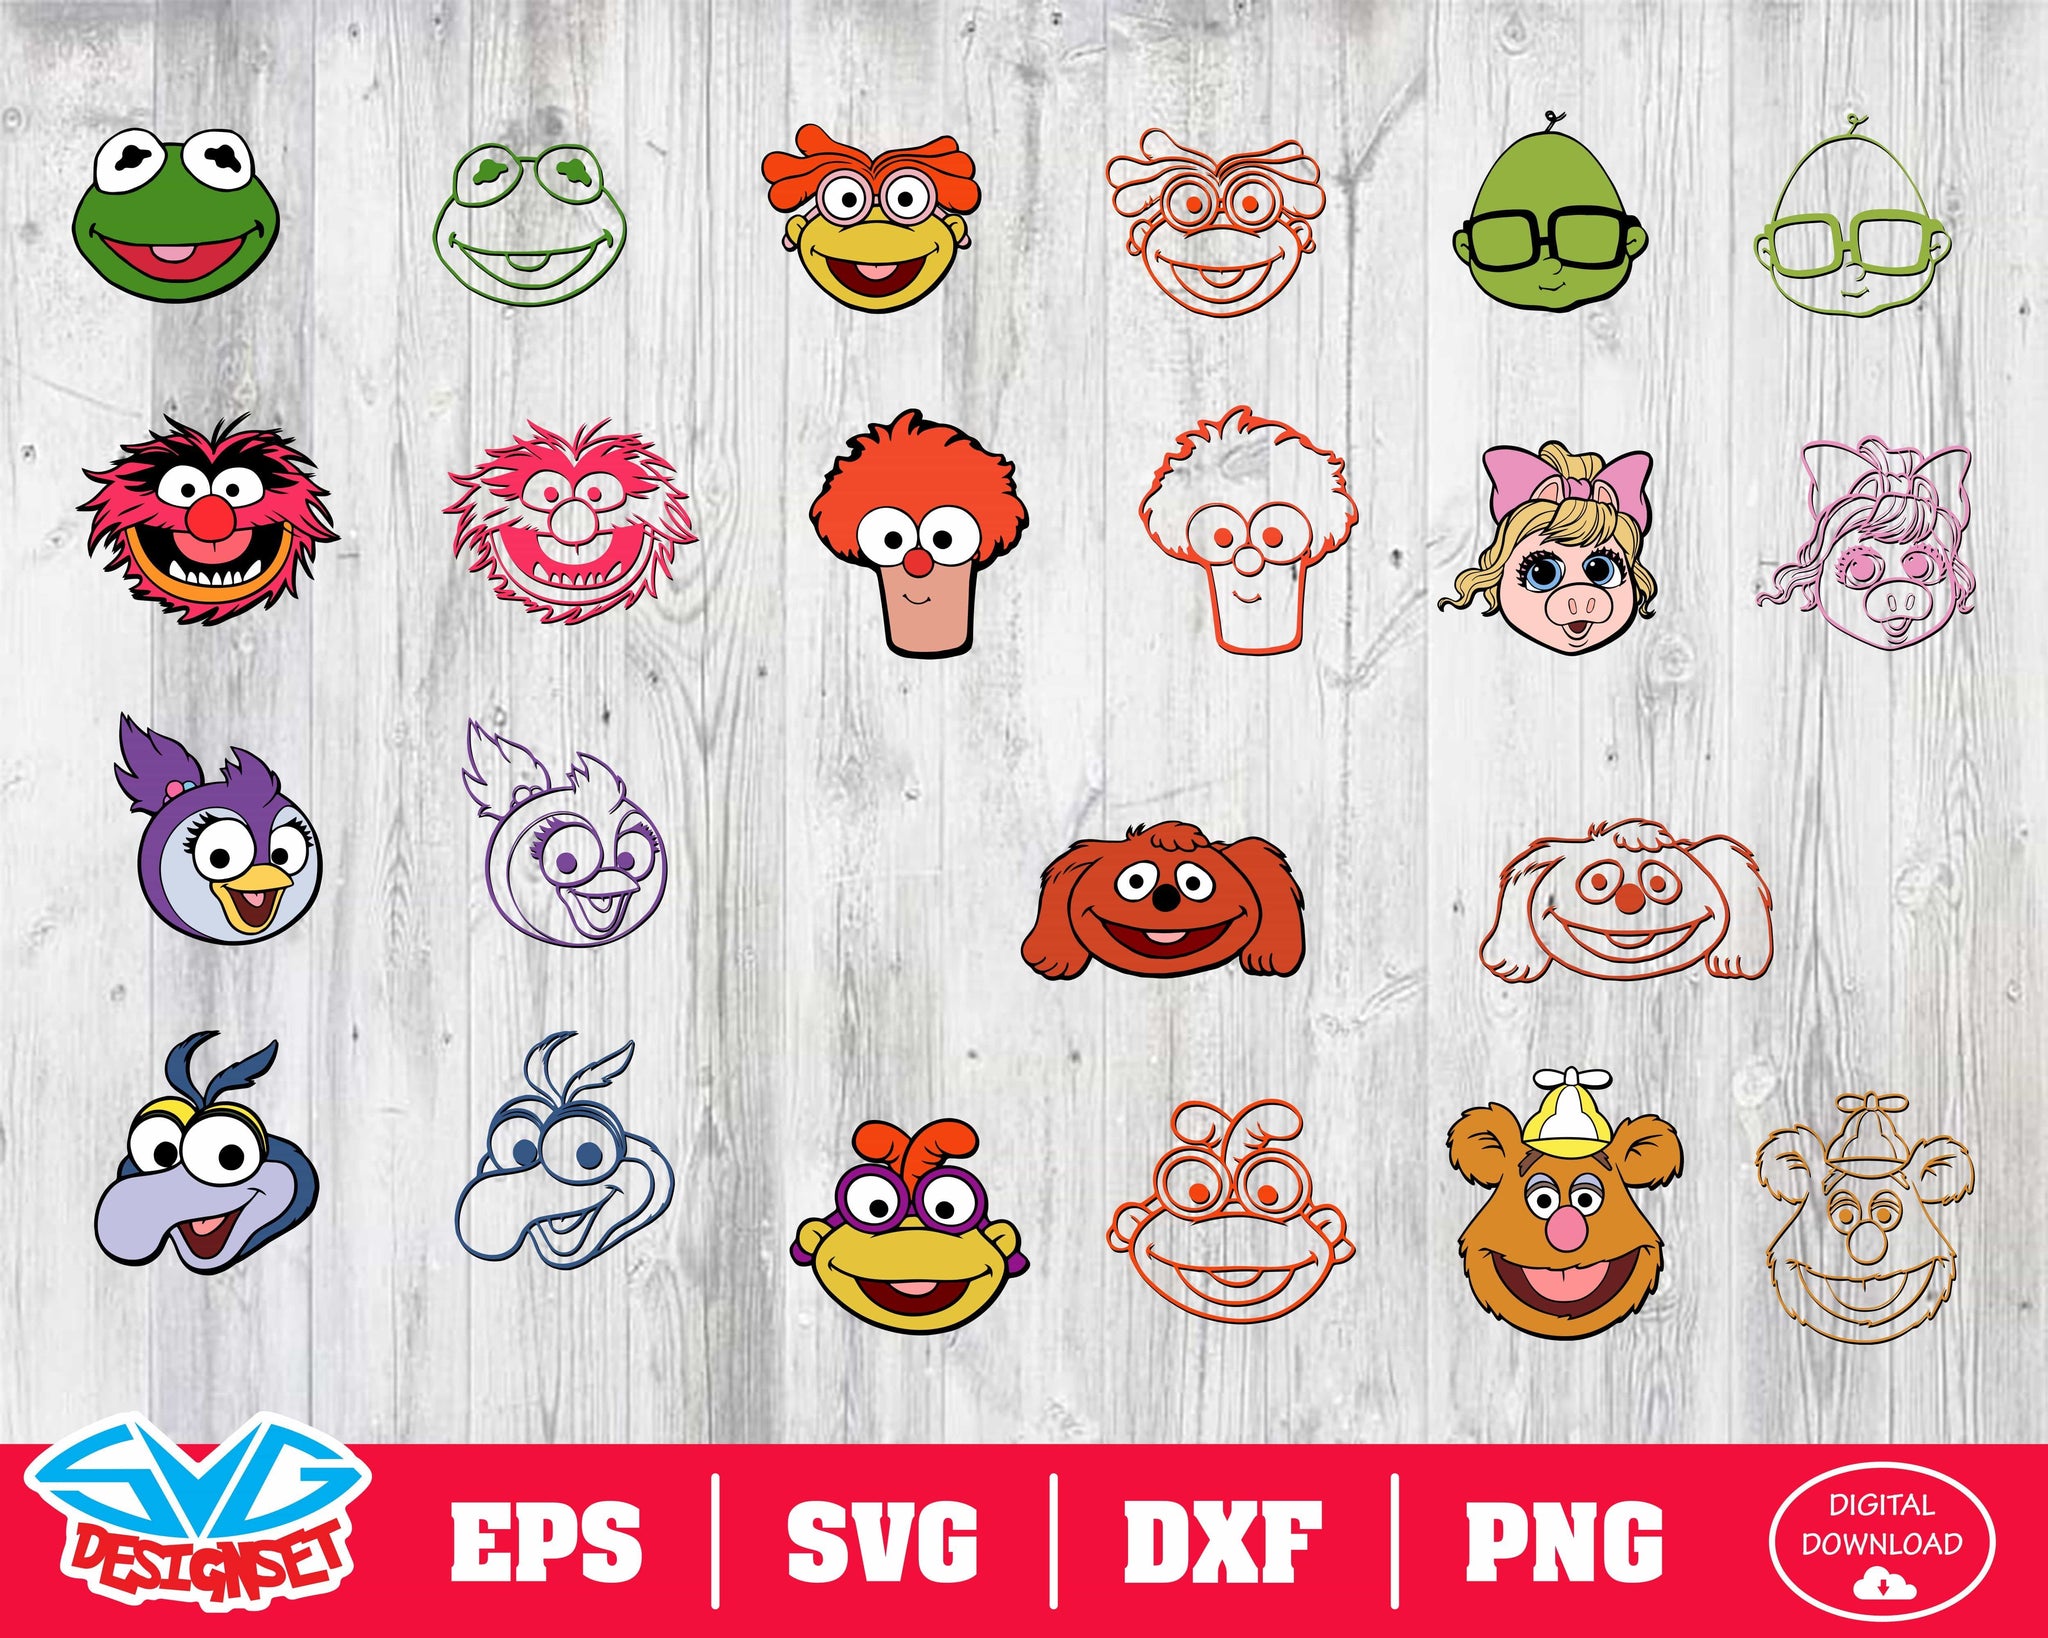 Muppets babies Svg, Dxf, Eps, Png, Clipart, Silhouette and Cutfiles #1 - SVGDesignSets